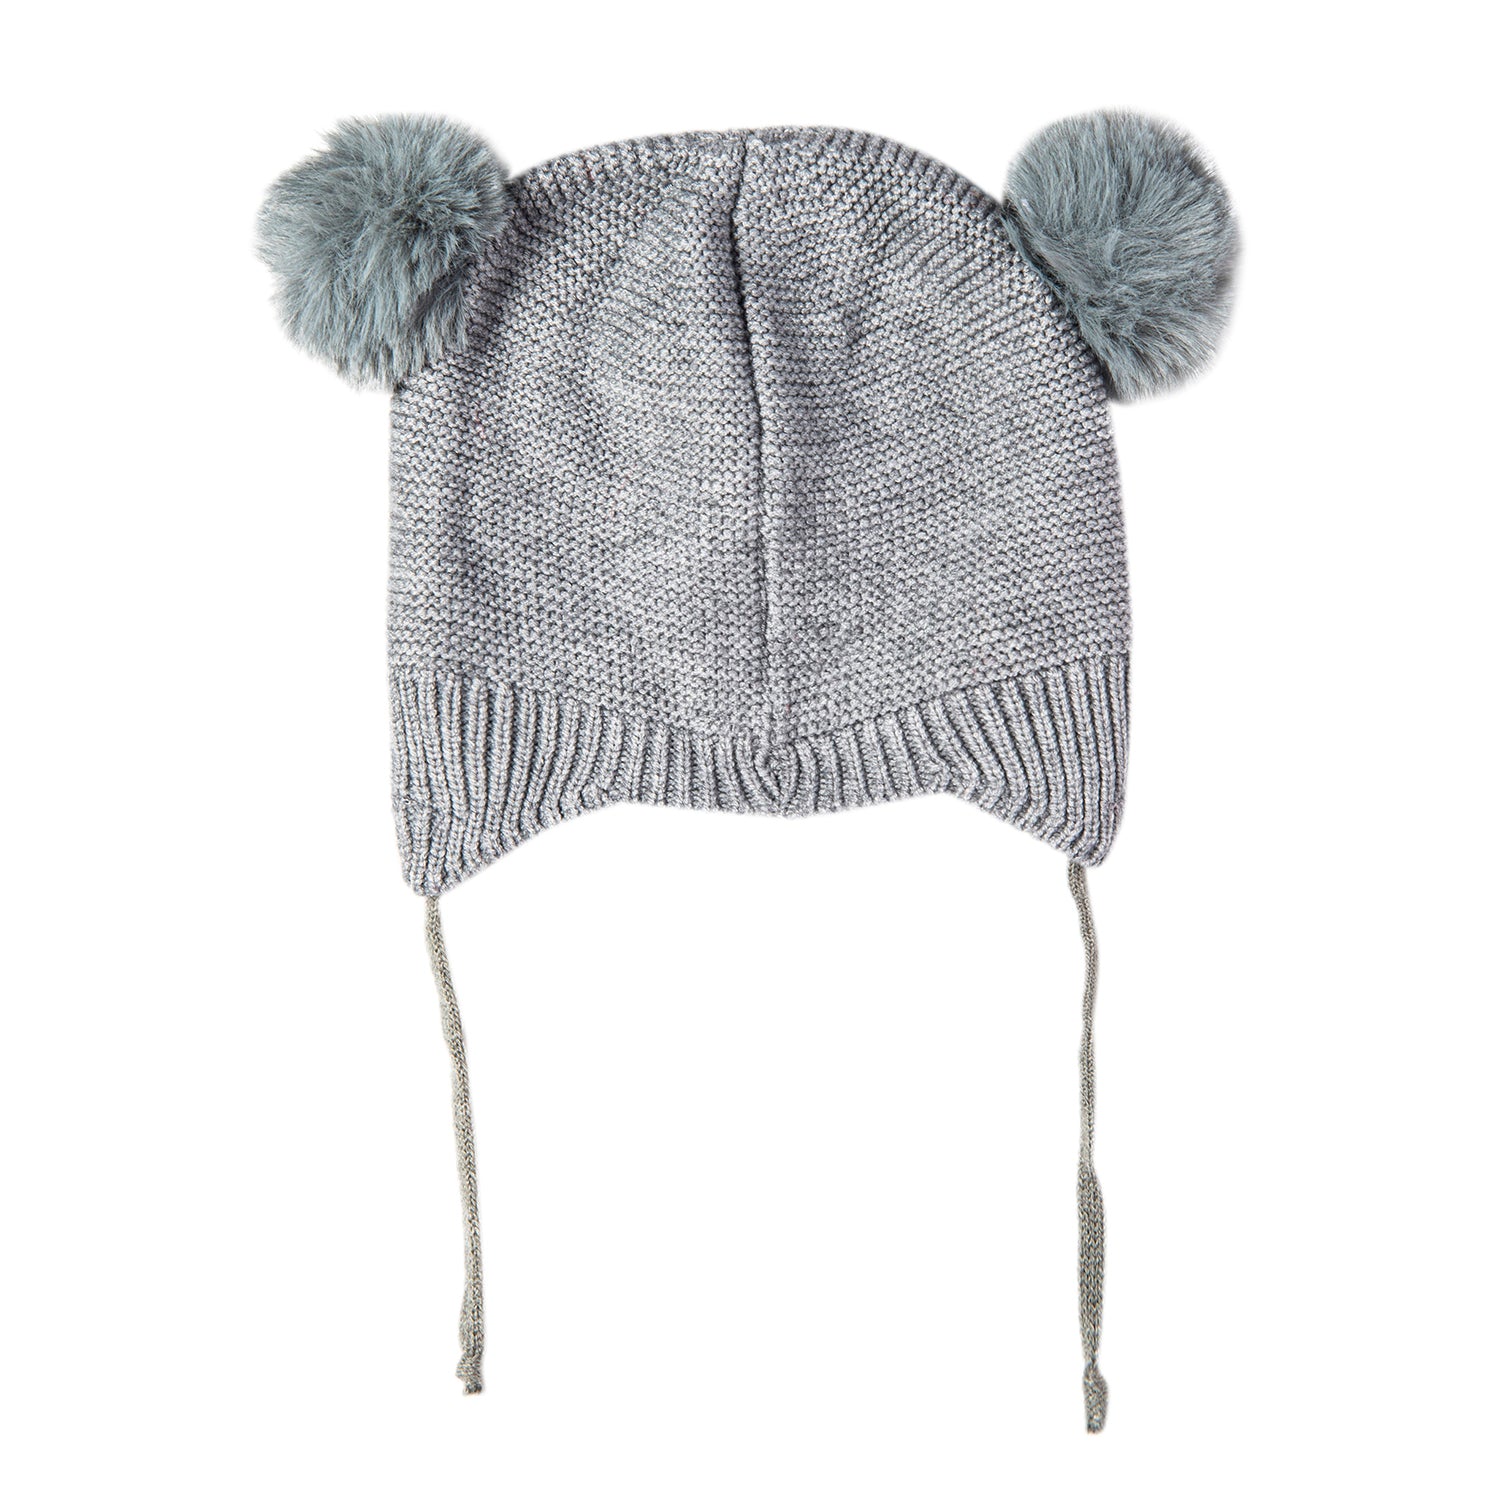 Knit Woollen Cap With Tie Knot For Ear Cover Sleeping Pom Pom Grey